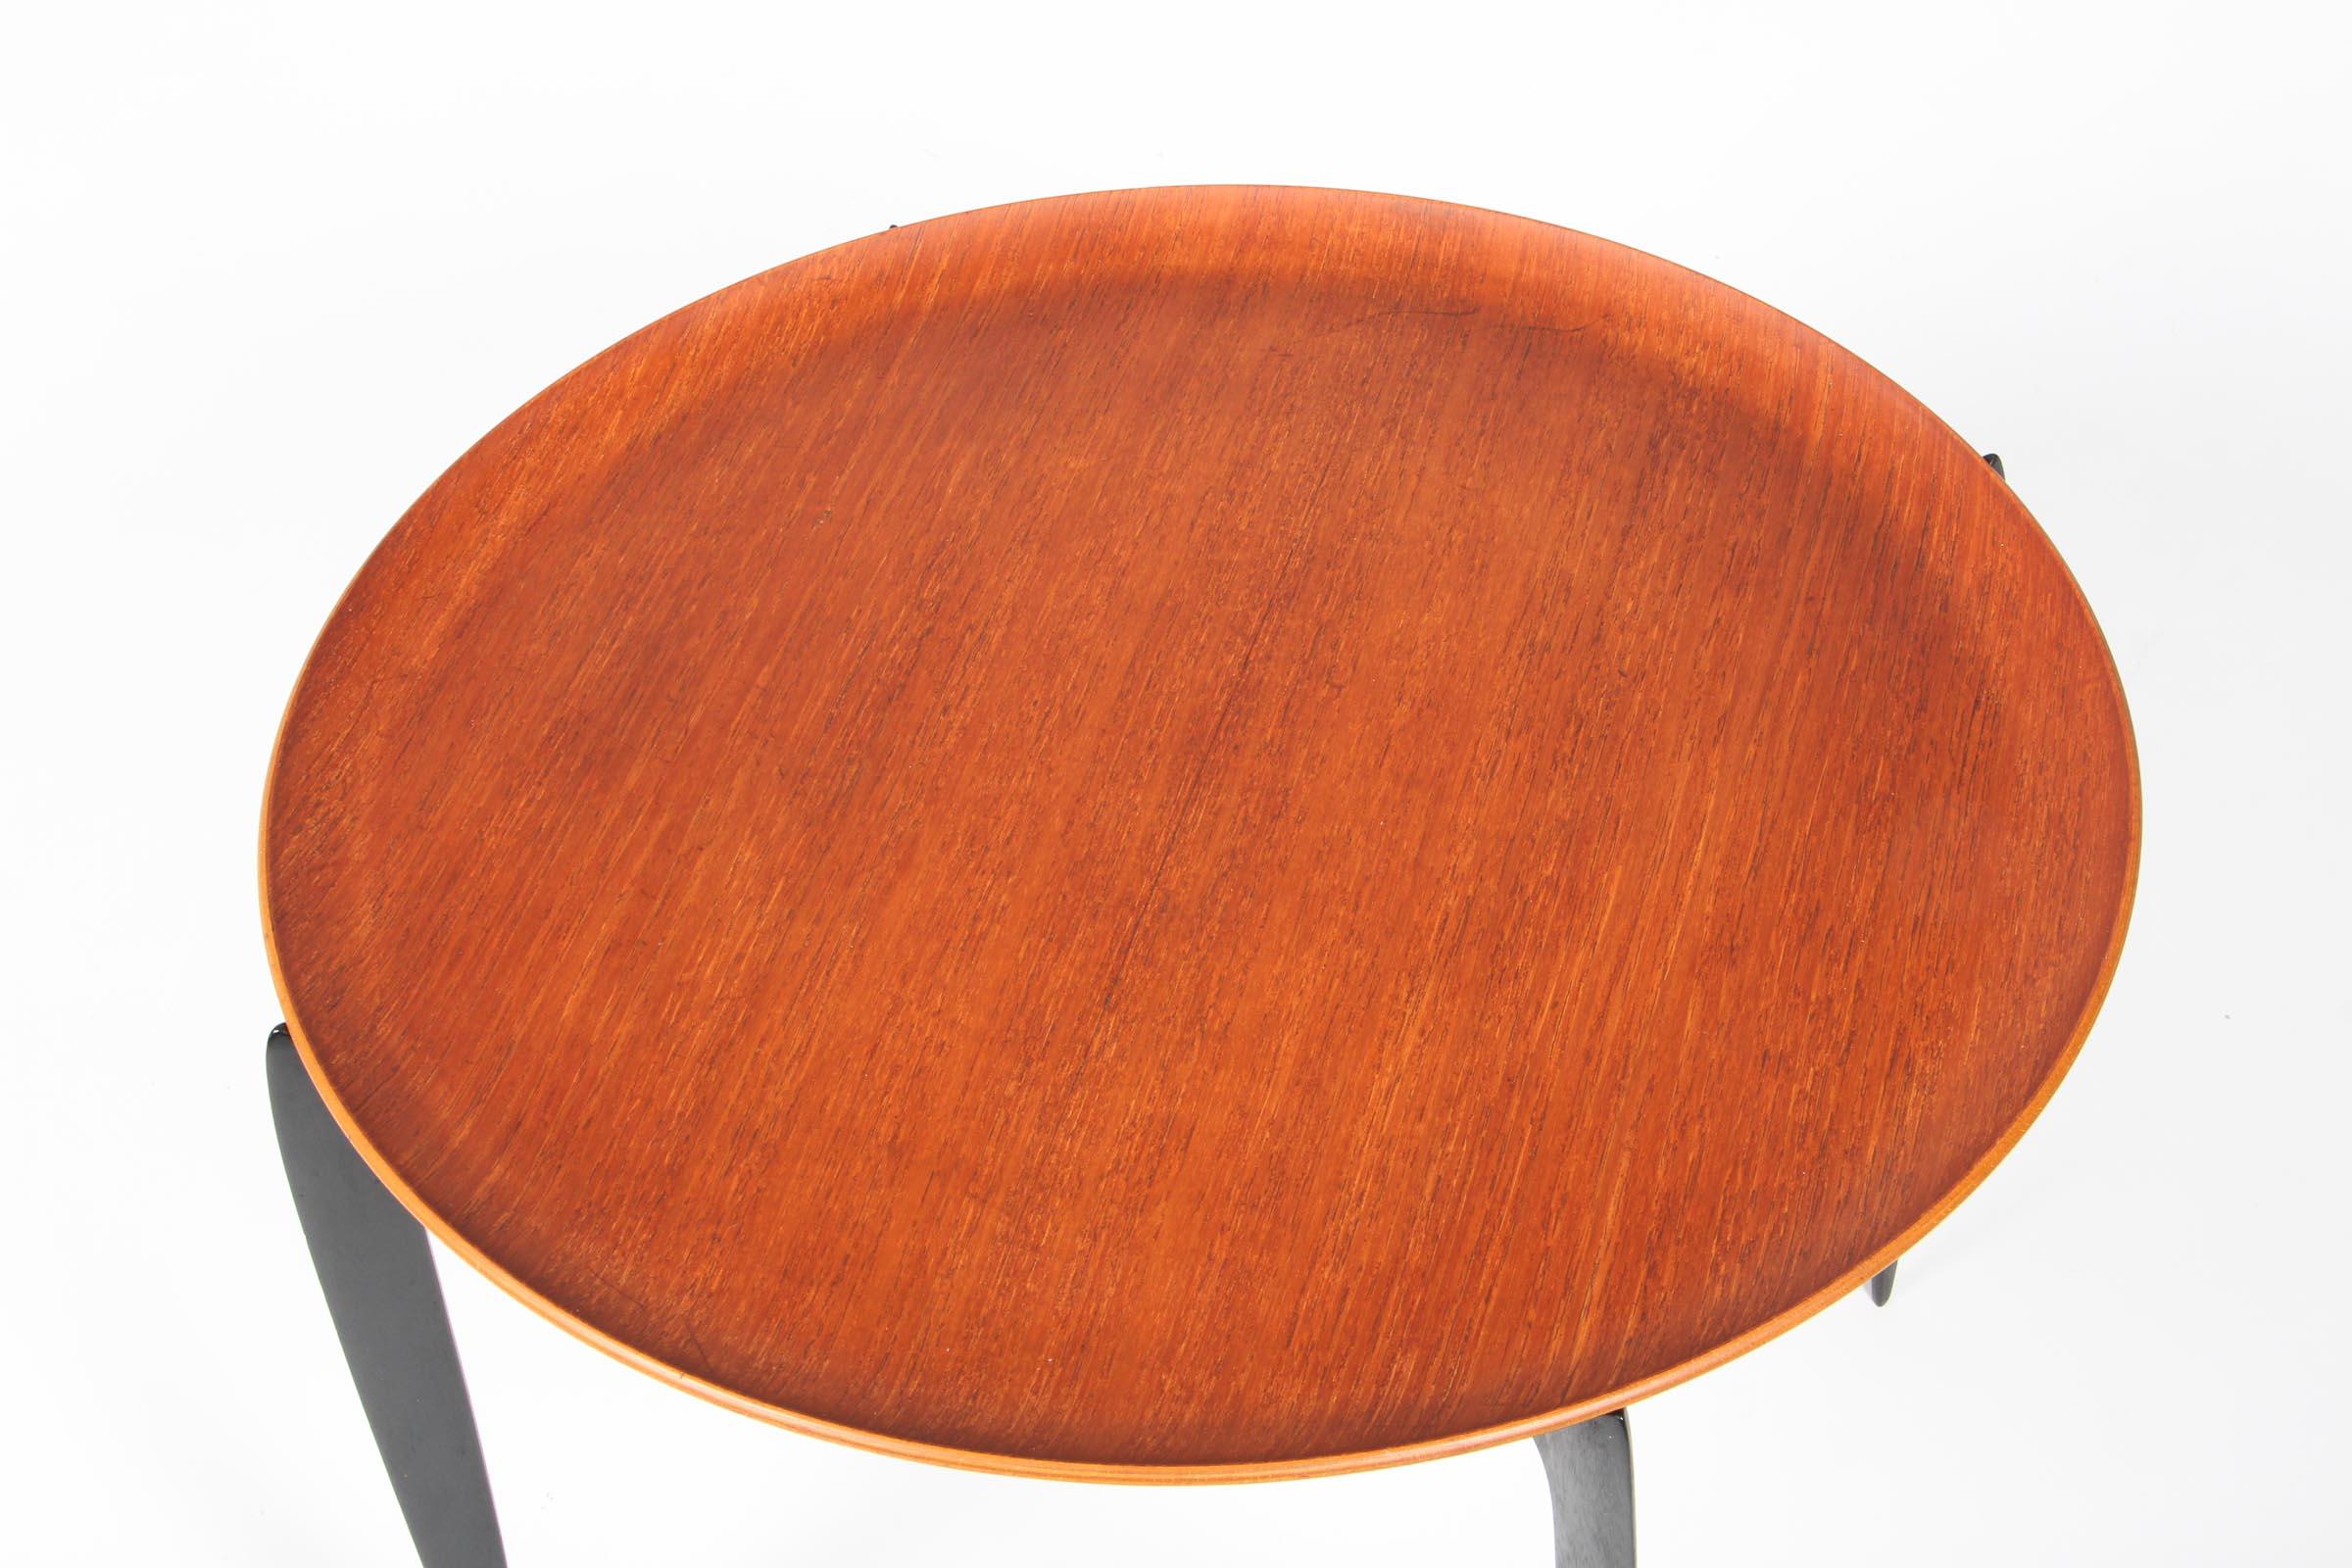 H. Engholm & Svend Åge Willumsen tray table with a plate of teak.

Base in original black painted wood. Can be folded together.

Made by Fritz Hansen.